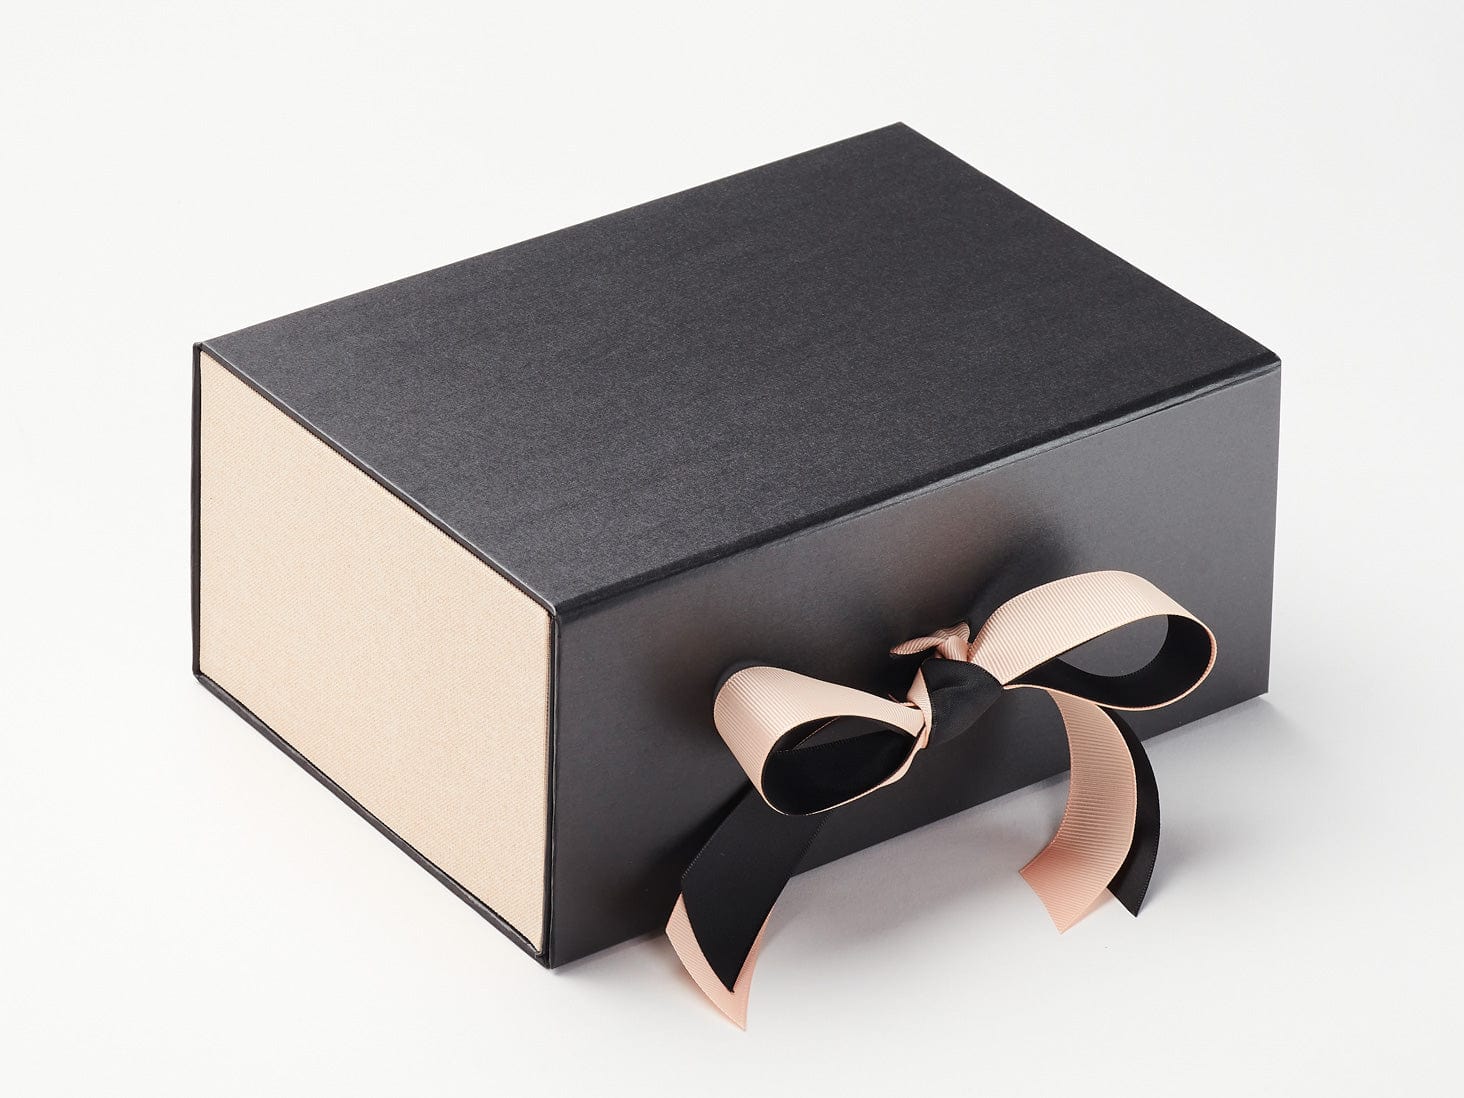 Introducing our newly launched No Magnet luxury boxes